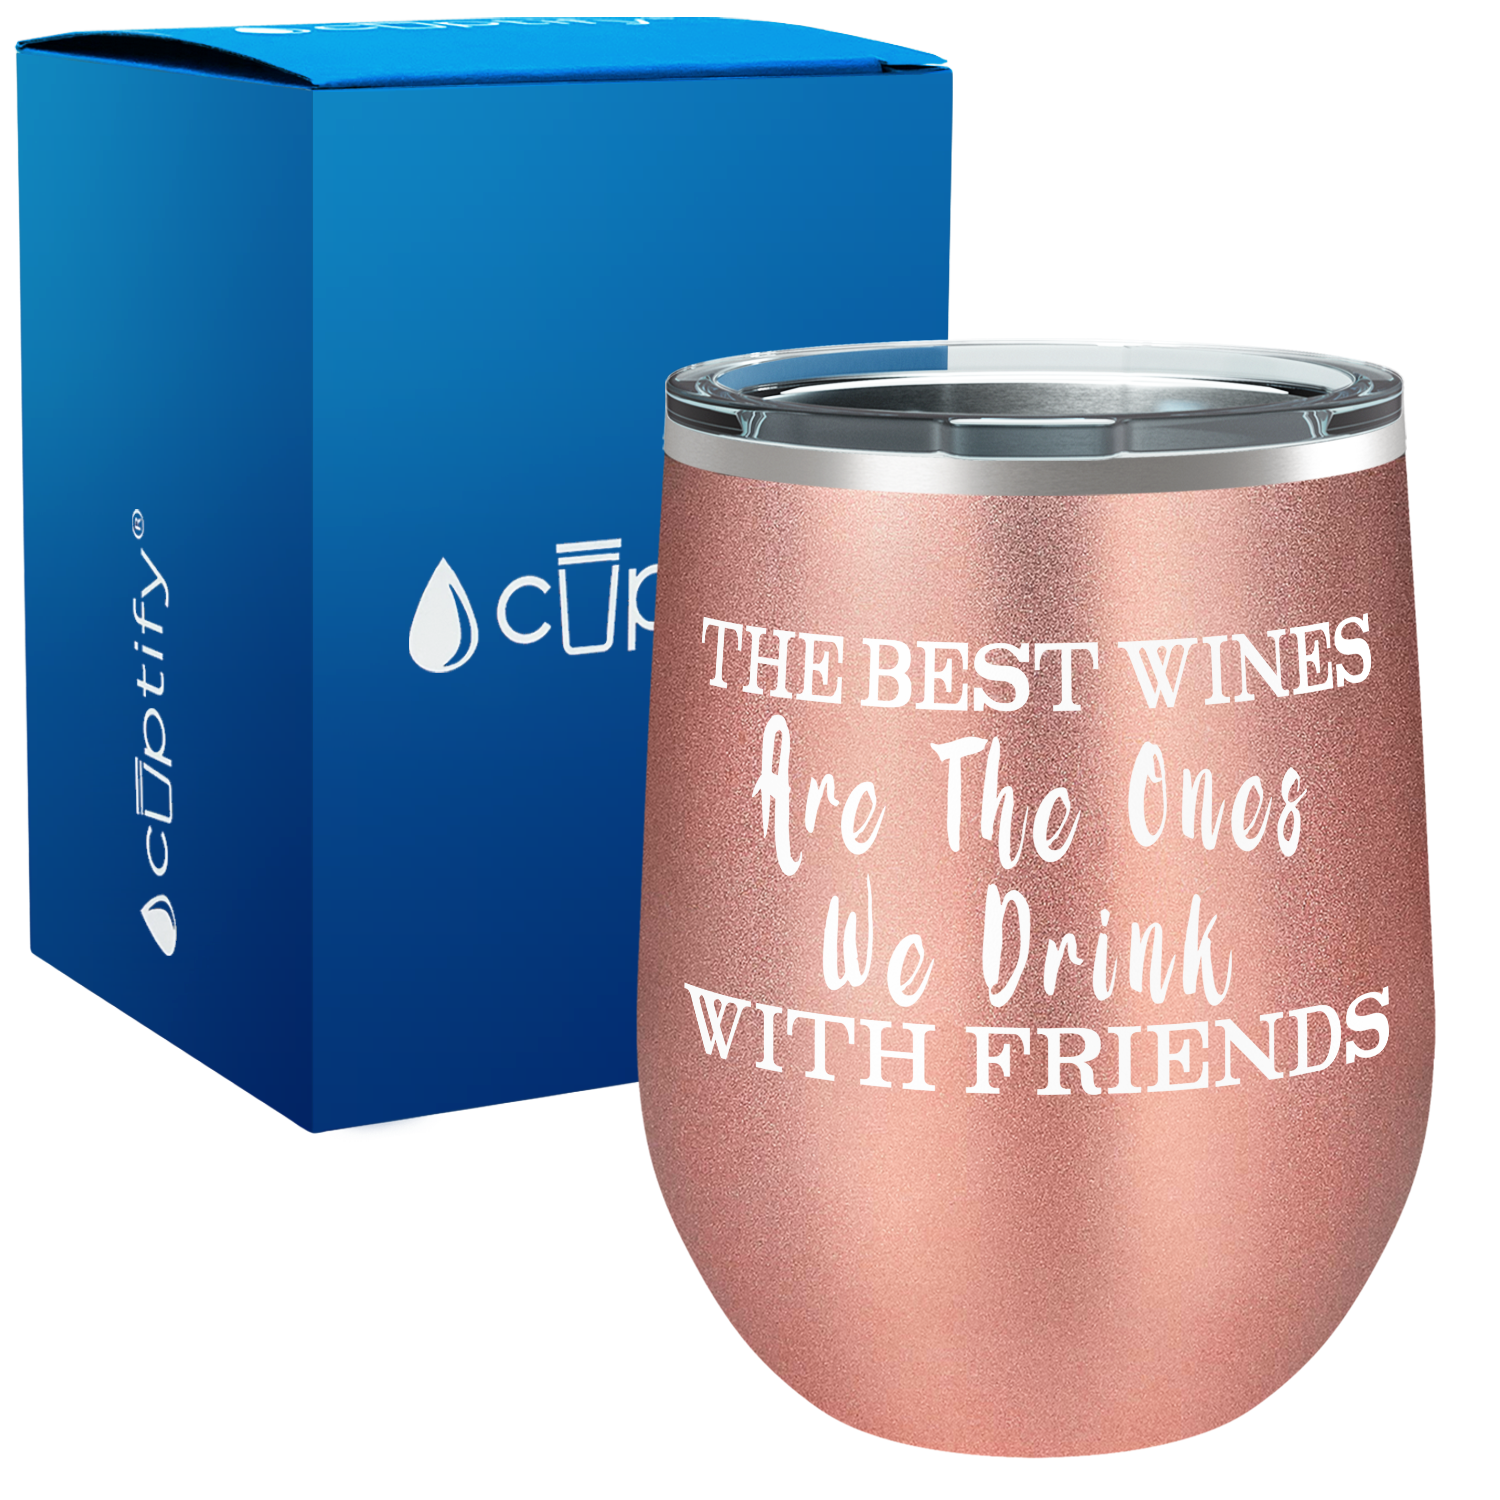 The Best Wines are the ones we Drink with Friends 12oz Stemless Wine Tumbler